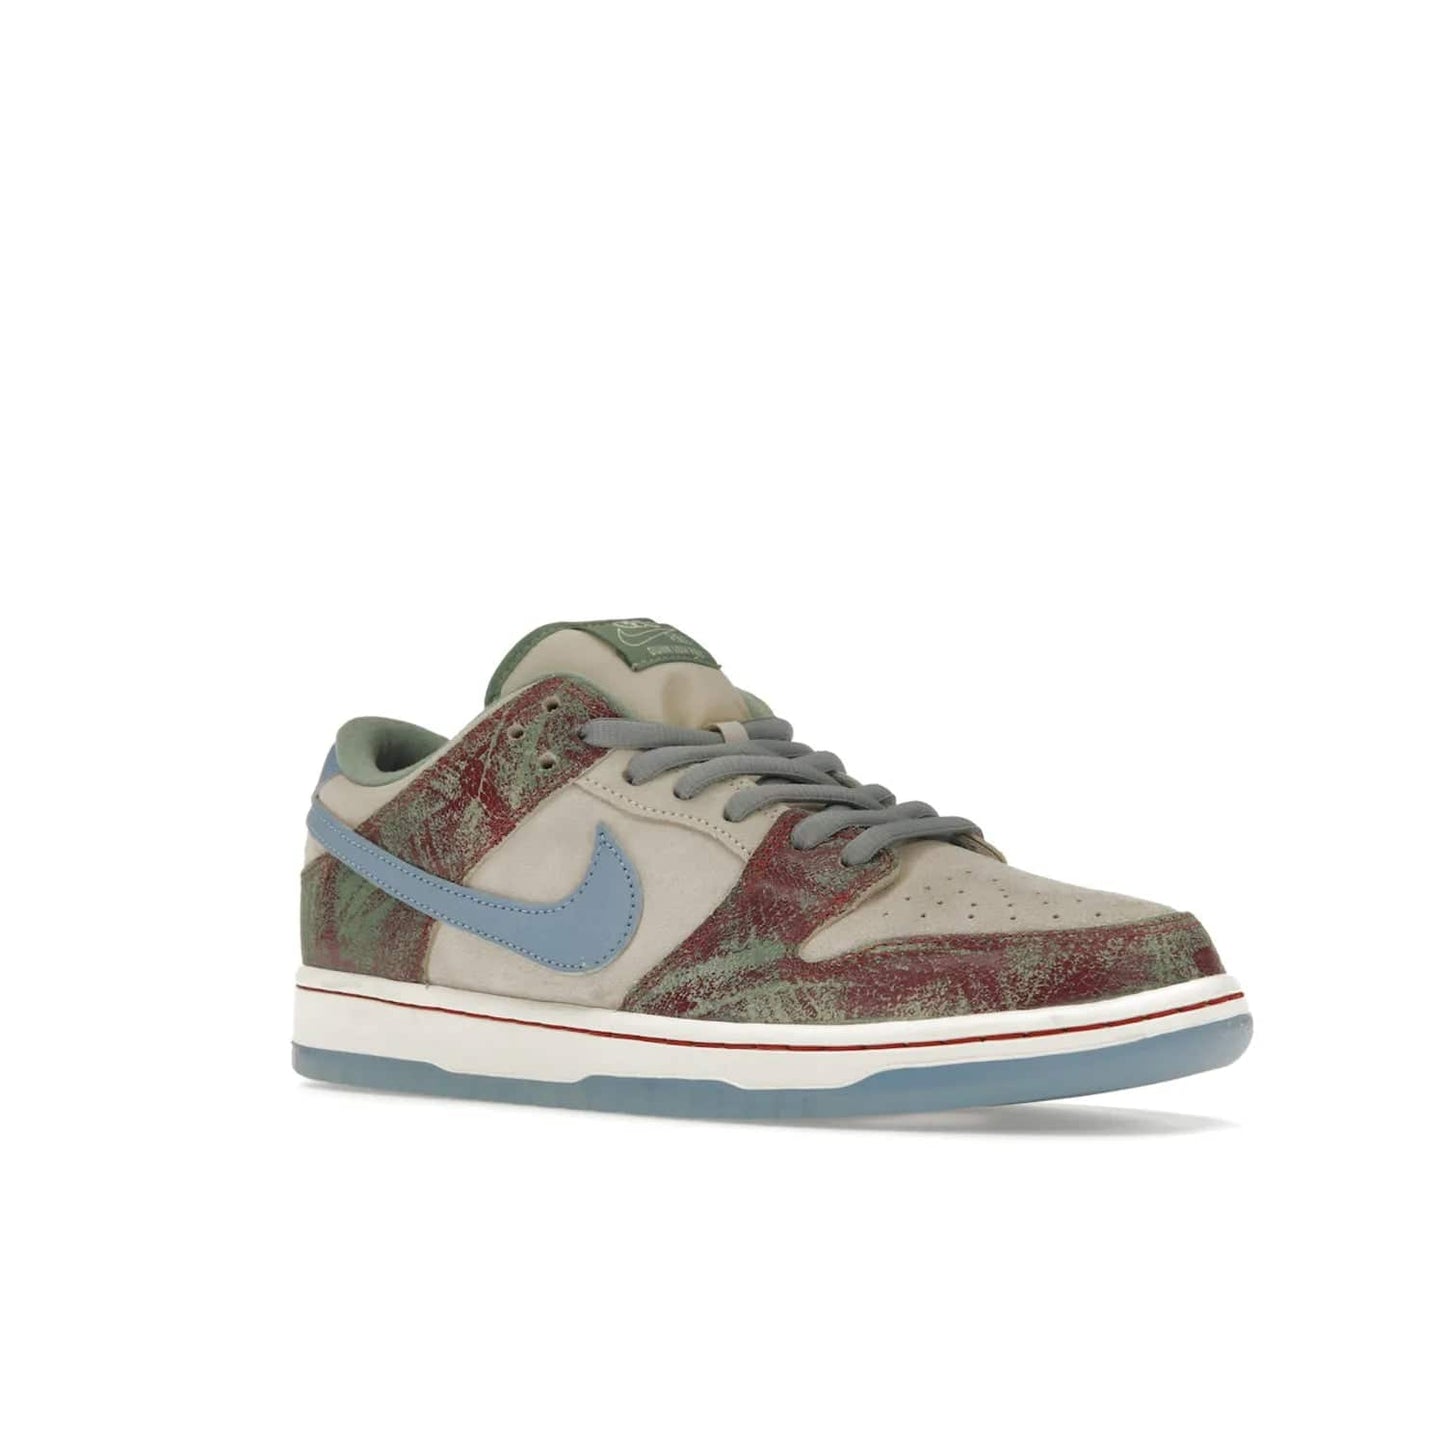 Nike SB Dunk Low Crenshaw Skate Club - Image 5 - Only at www.BallersClubKickz.com - Introducing the Nike SB Dunk Low Crenshaw Skate Club! Classic skate shoes with Sail and Light Blue upper, Cedar accents, padded collars and superior grip for comfortable, stable performance and style. Ideal for any skate session.